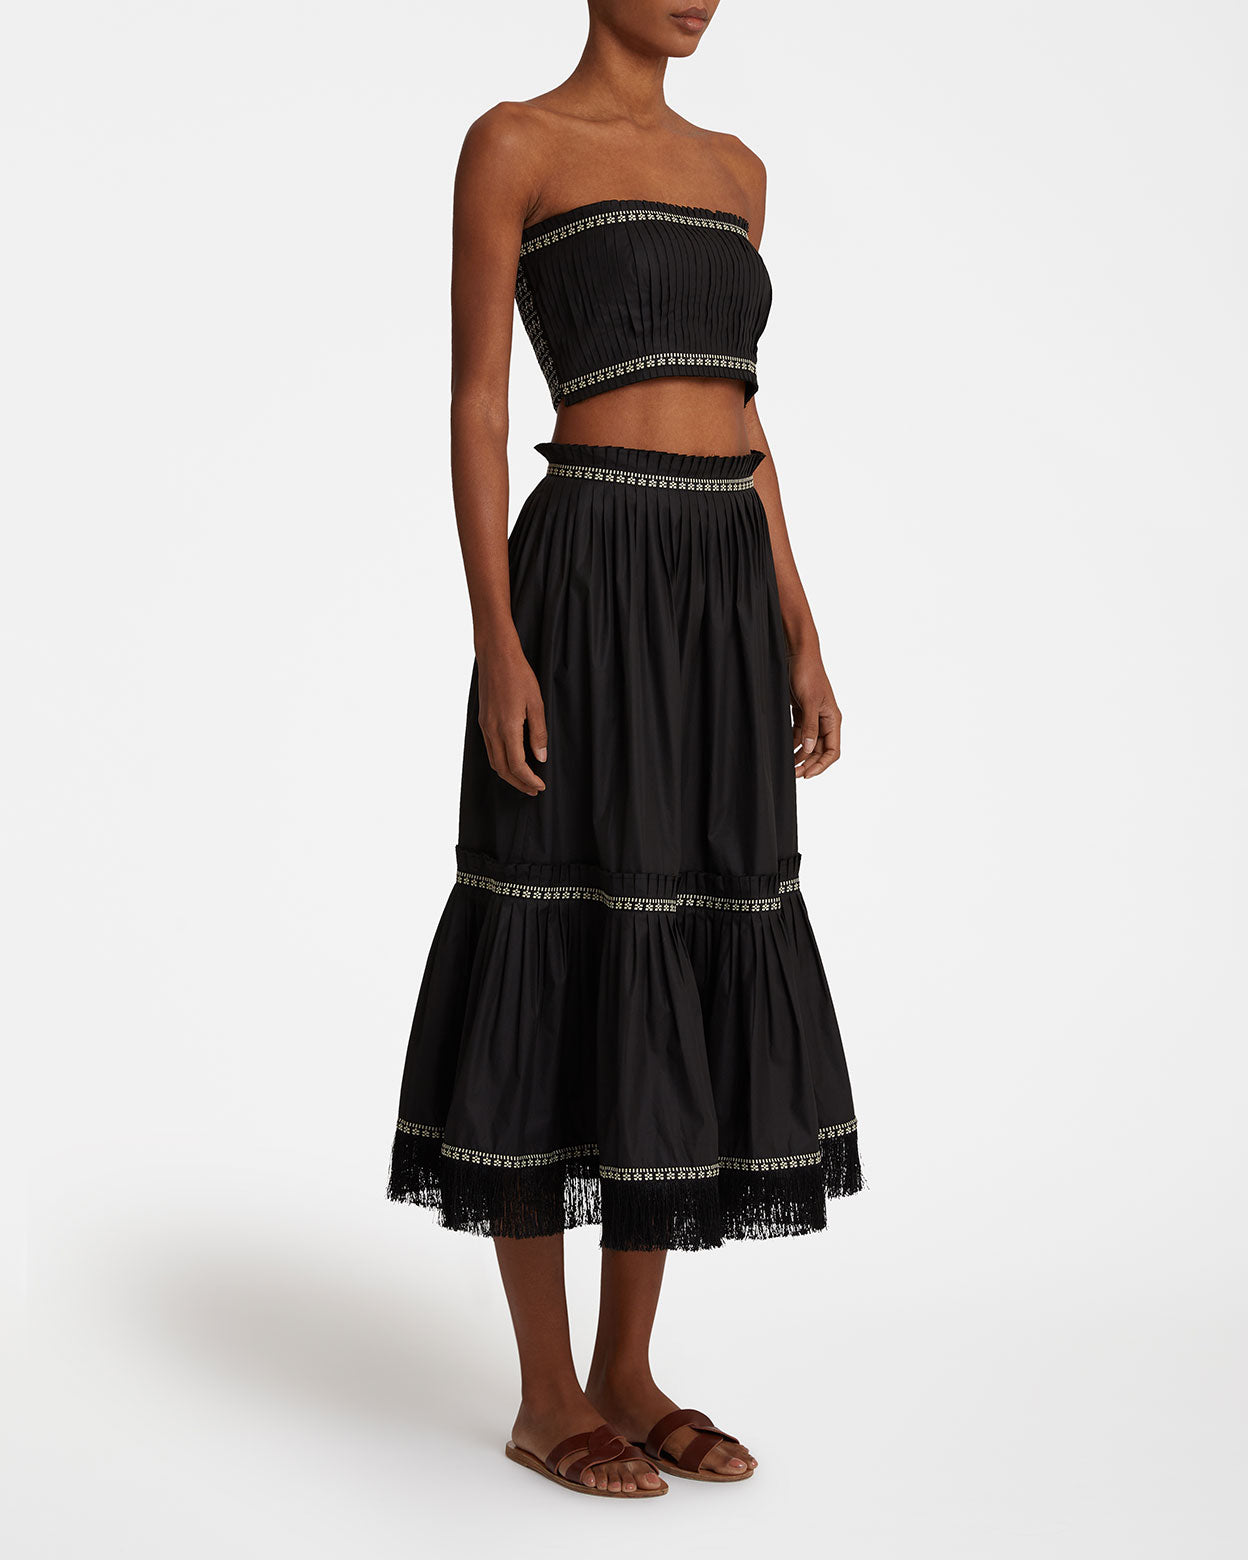 Dorina Skirt With Wild Horse Embroidery